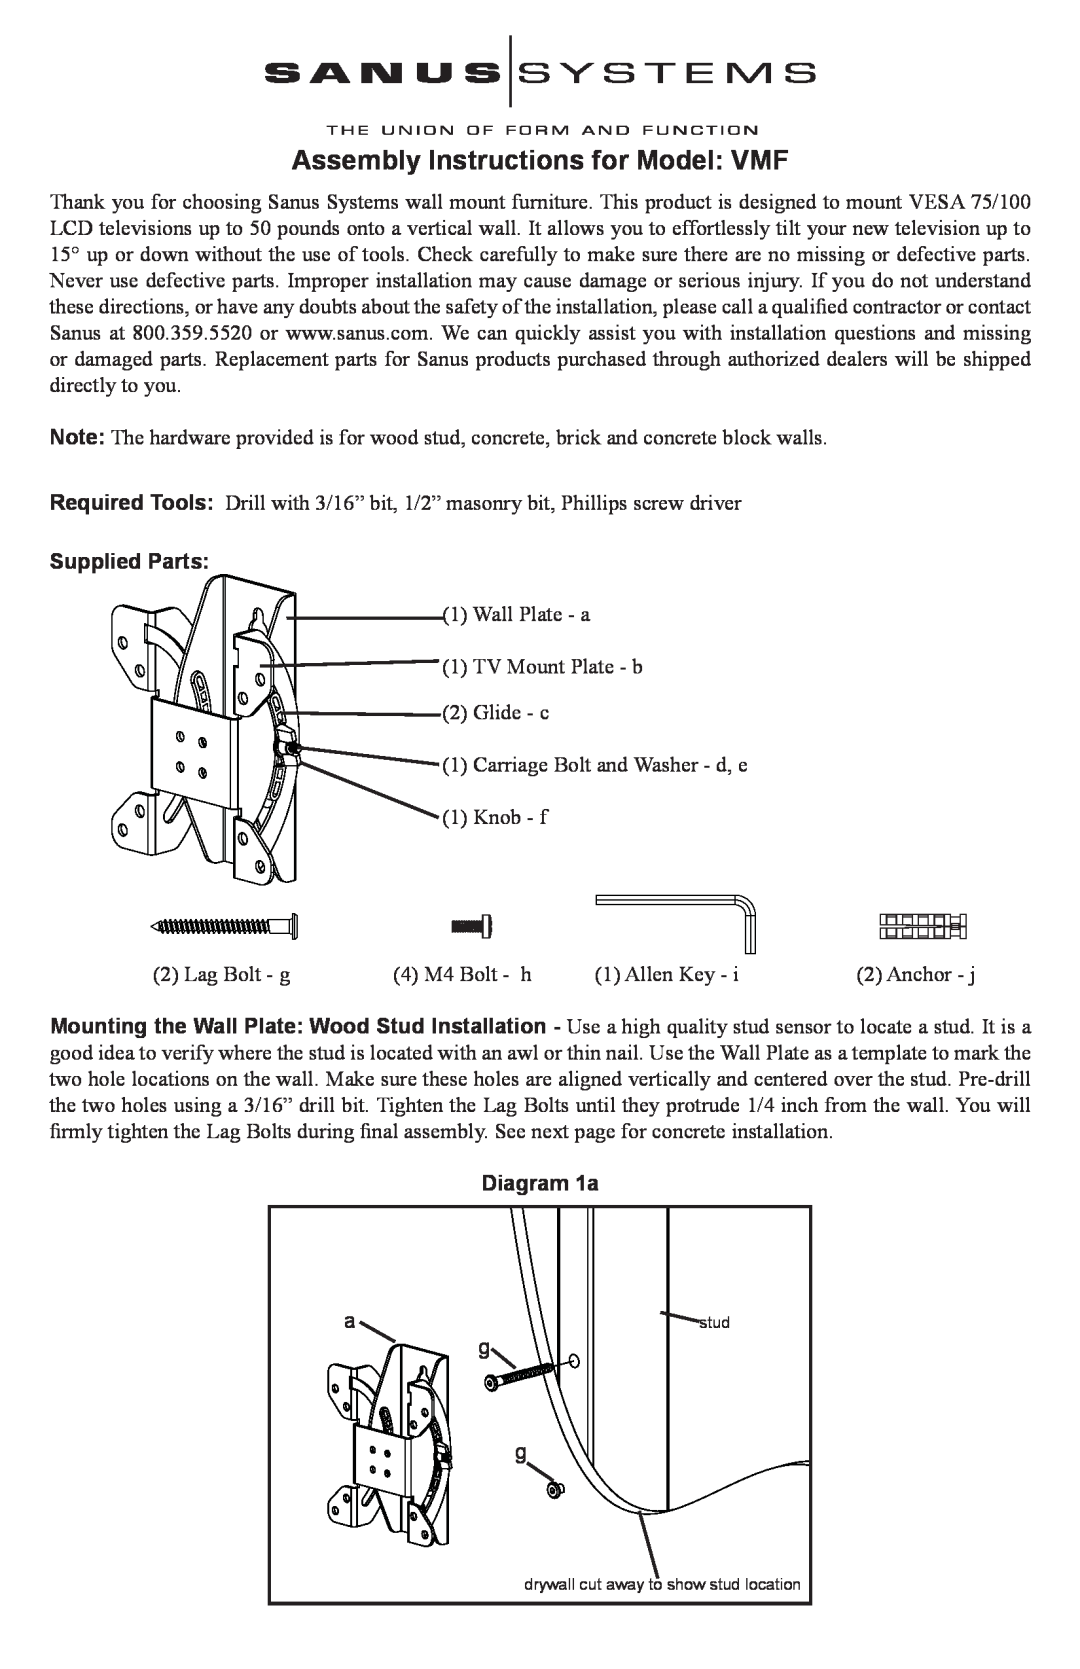 Sanus Systems manual Supplied Parts, Diagram 1a, Assembly Instructions for Model VMF 